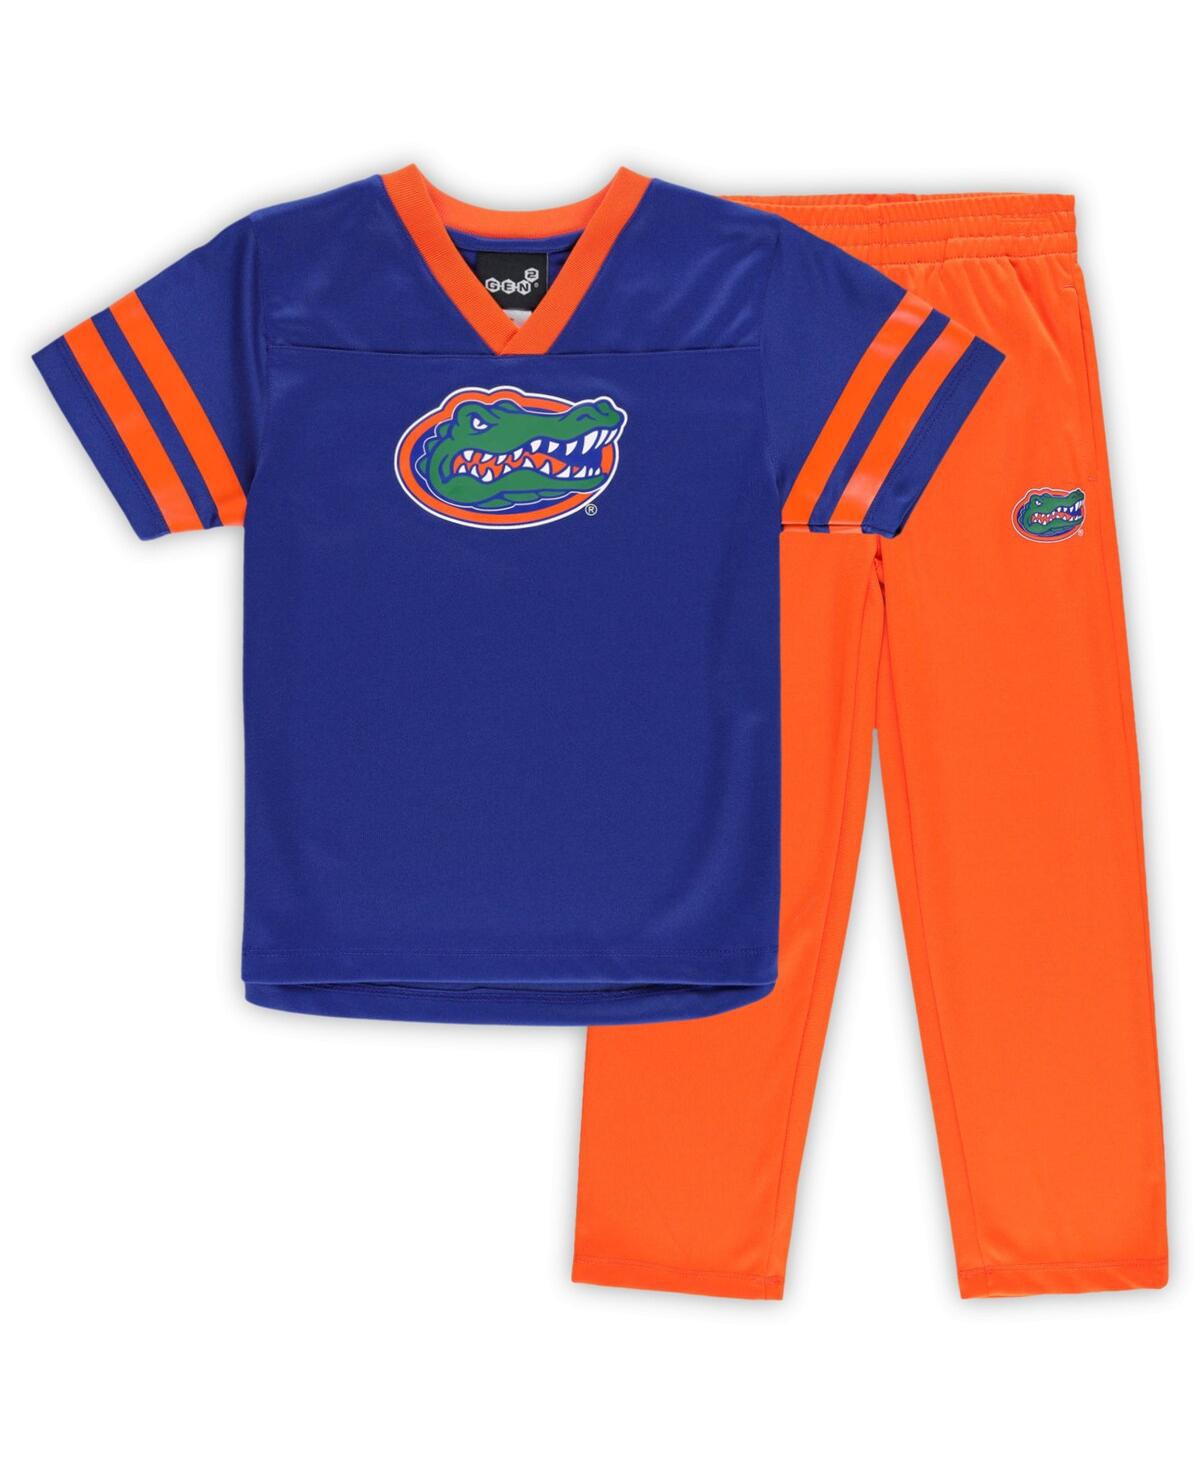 Outerstuff Babies' Toddler Boys And Girls Royal And Orange Florida Gators Red Zone Jersey And Pants Set In Royal,orange